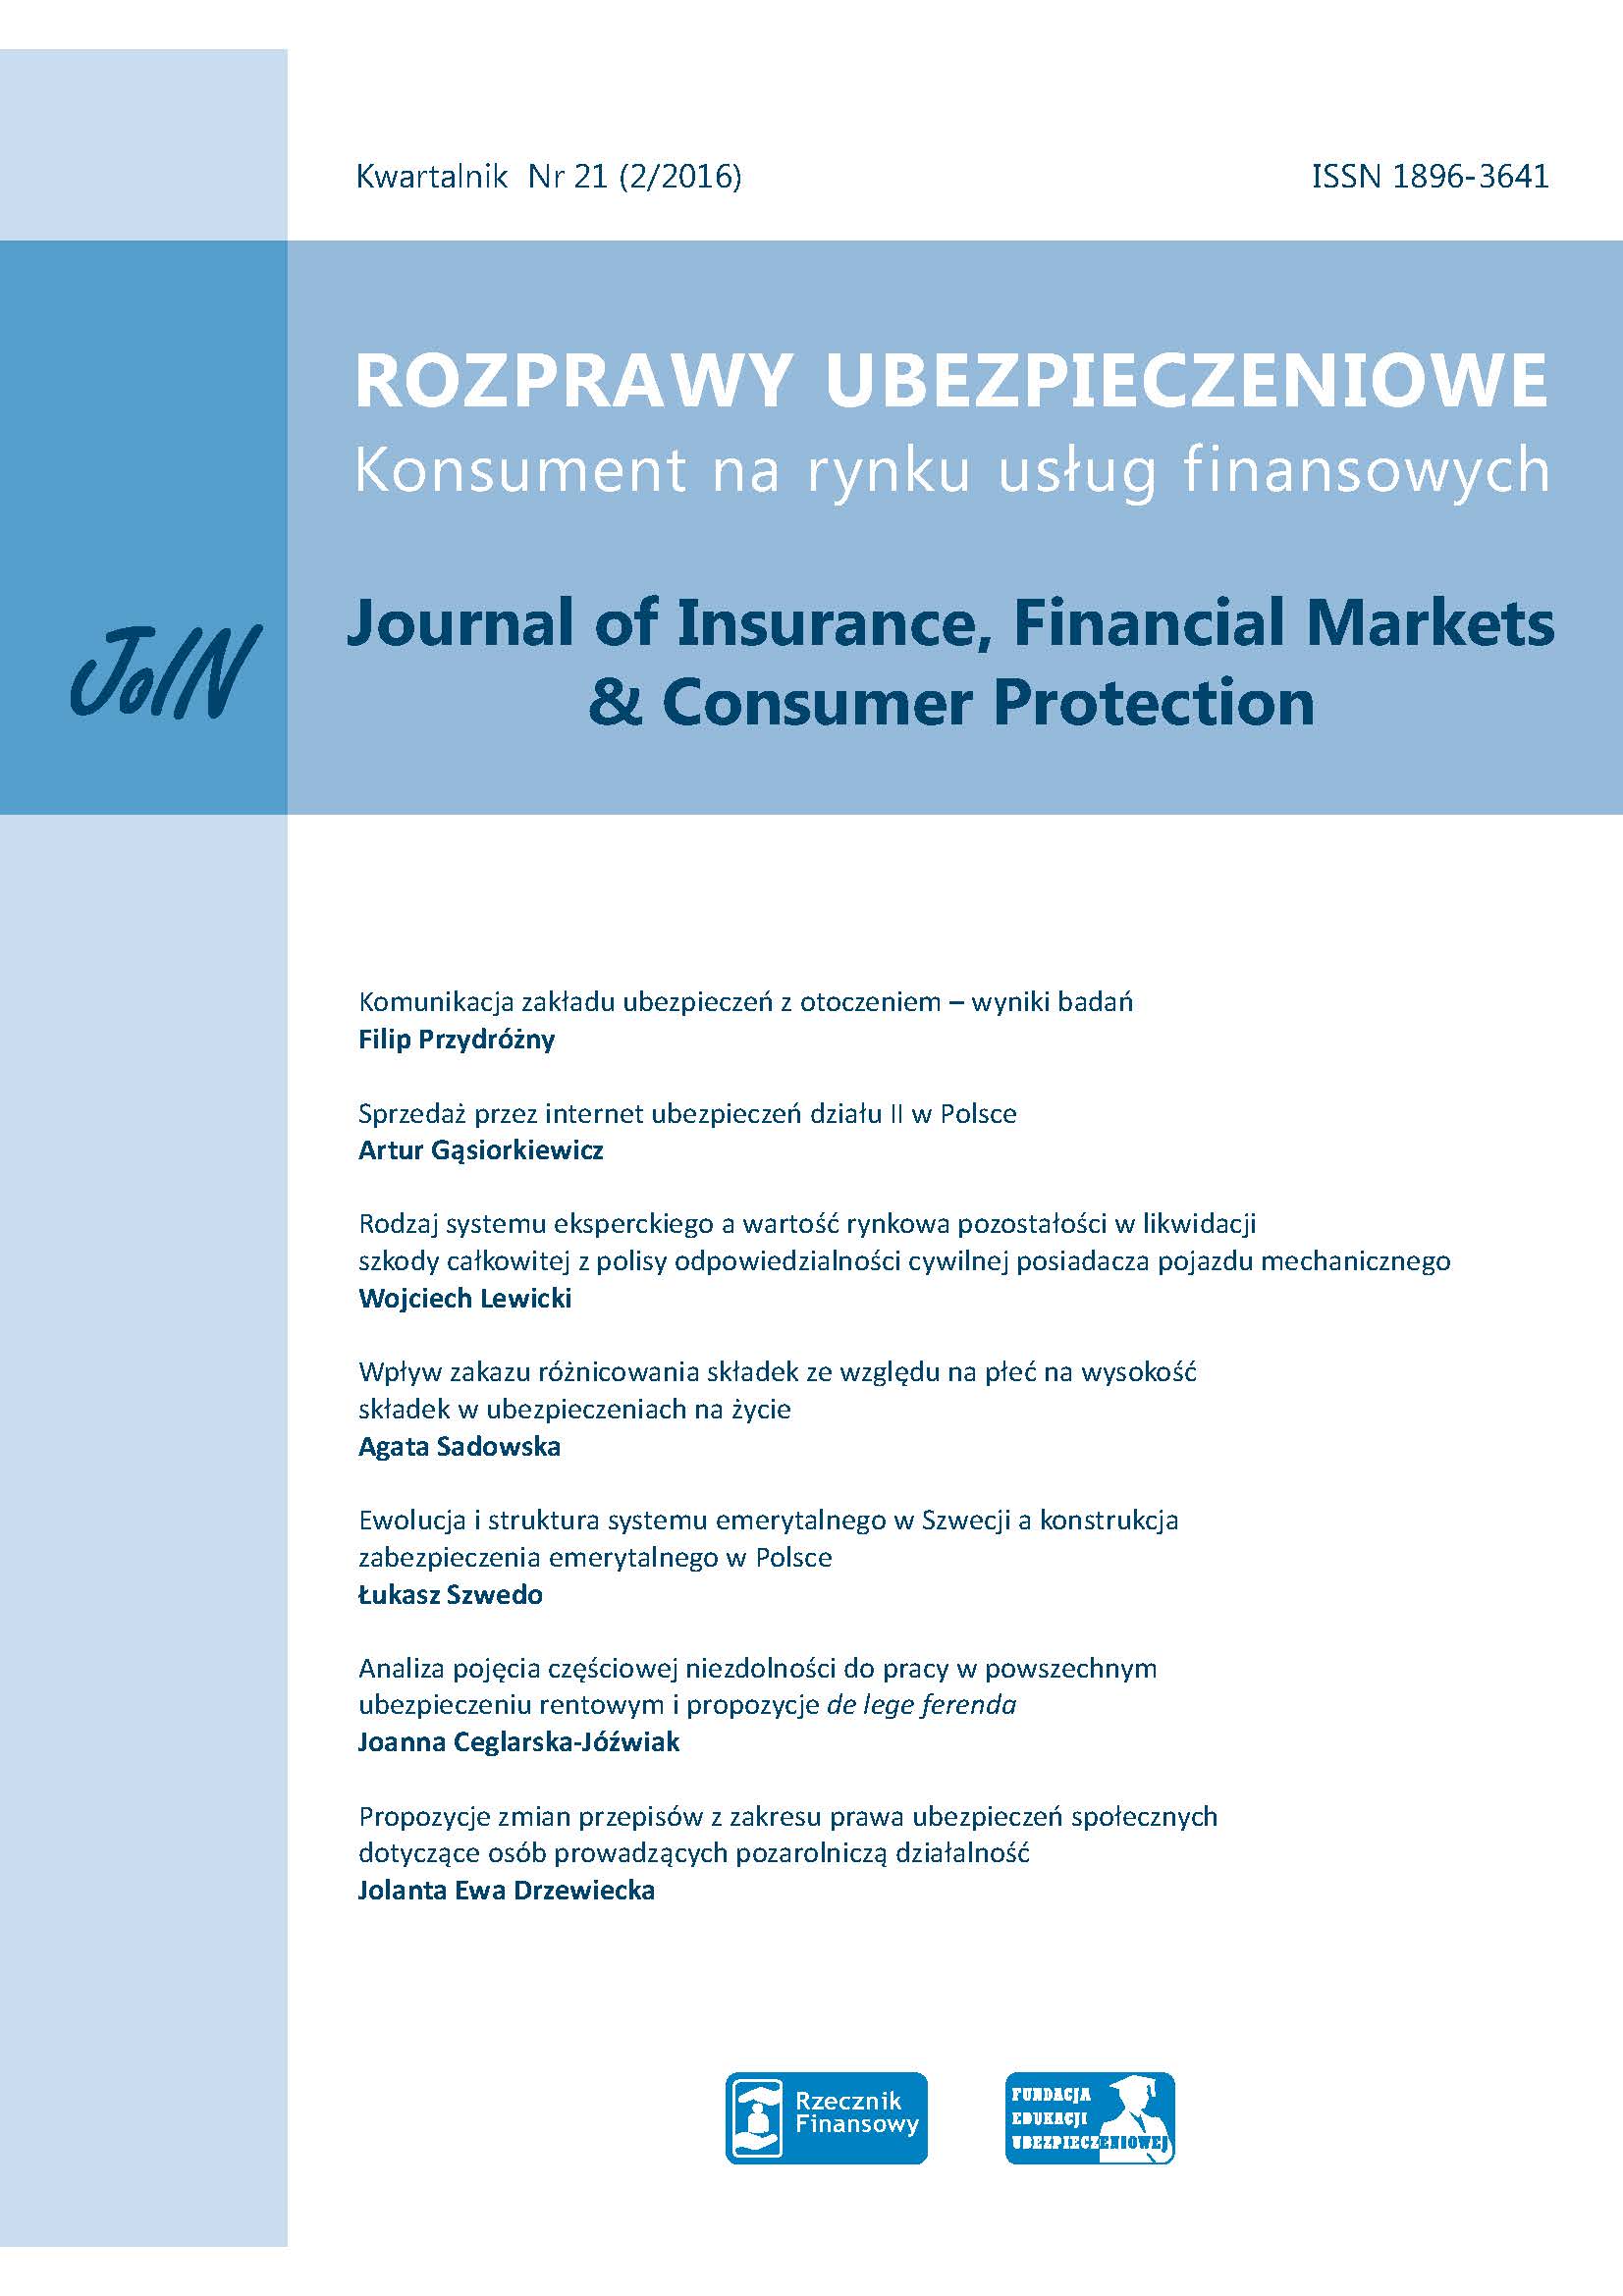 Evolution and structure of the pension system in Sweden and framework of the retirement security in Poland Cover Image